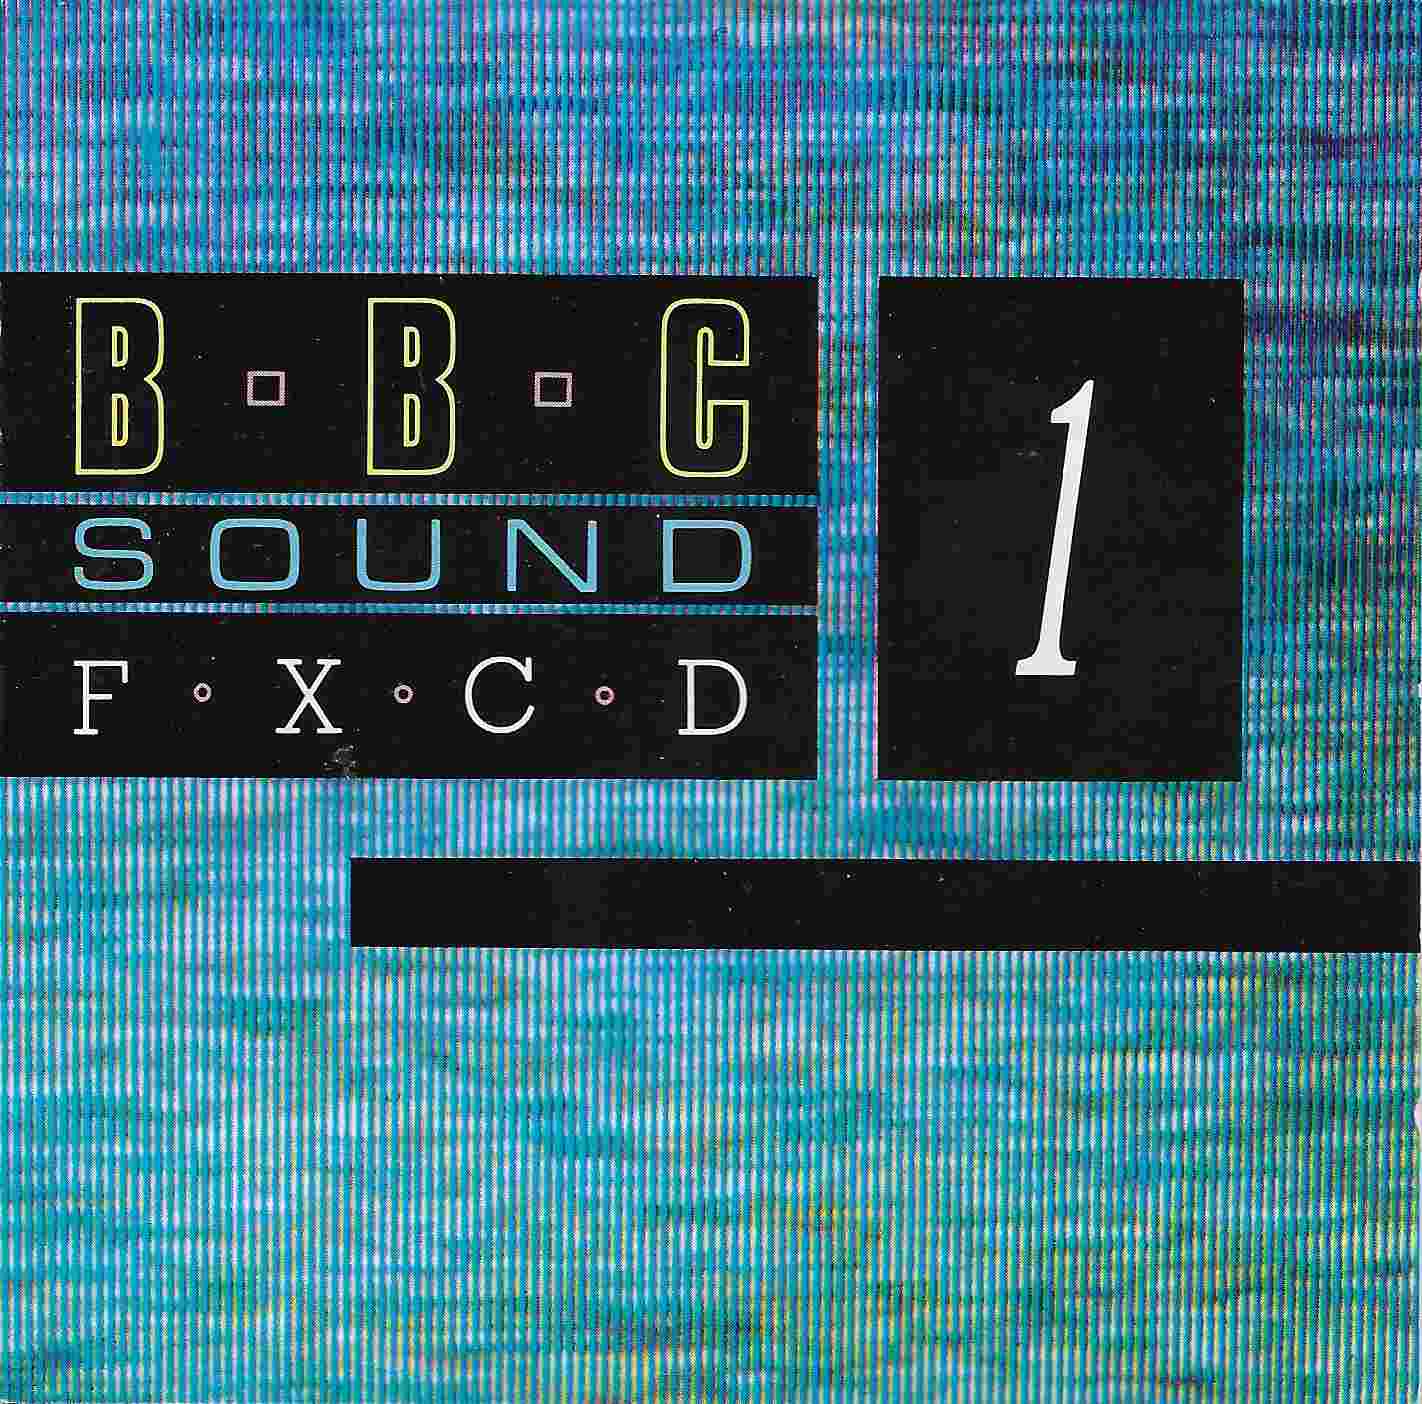 Picture of BBCCD SFX001 BBC sound effects by artist Various